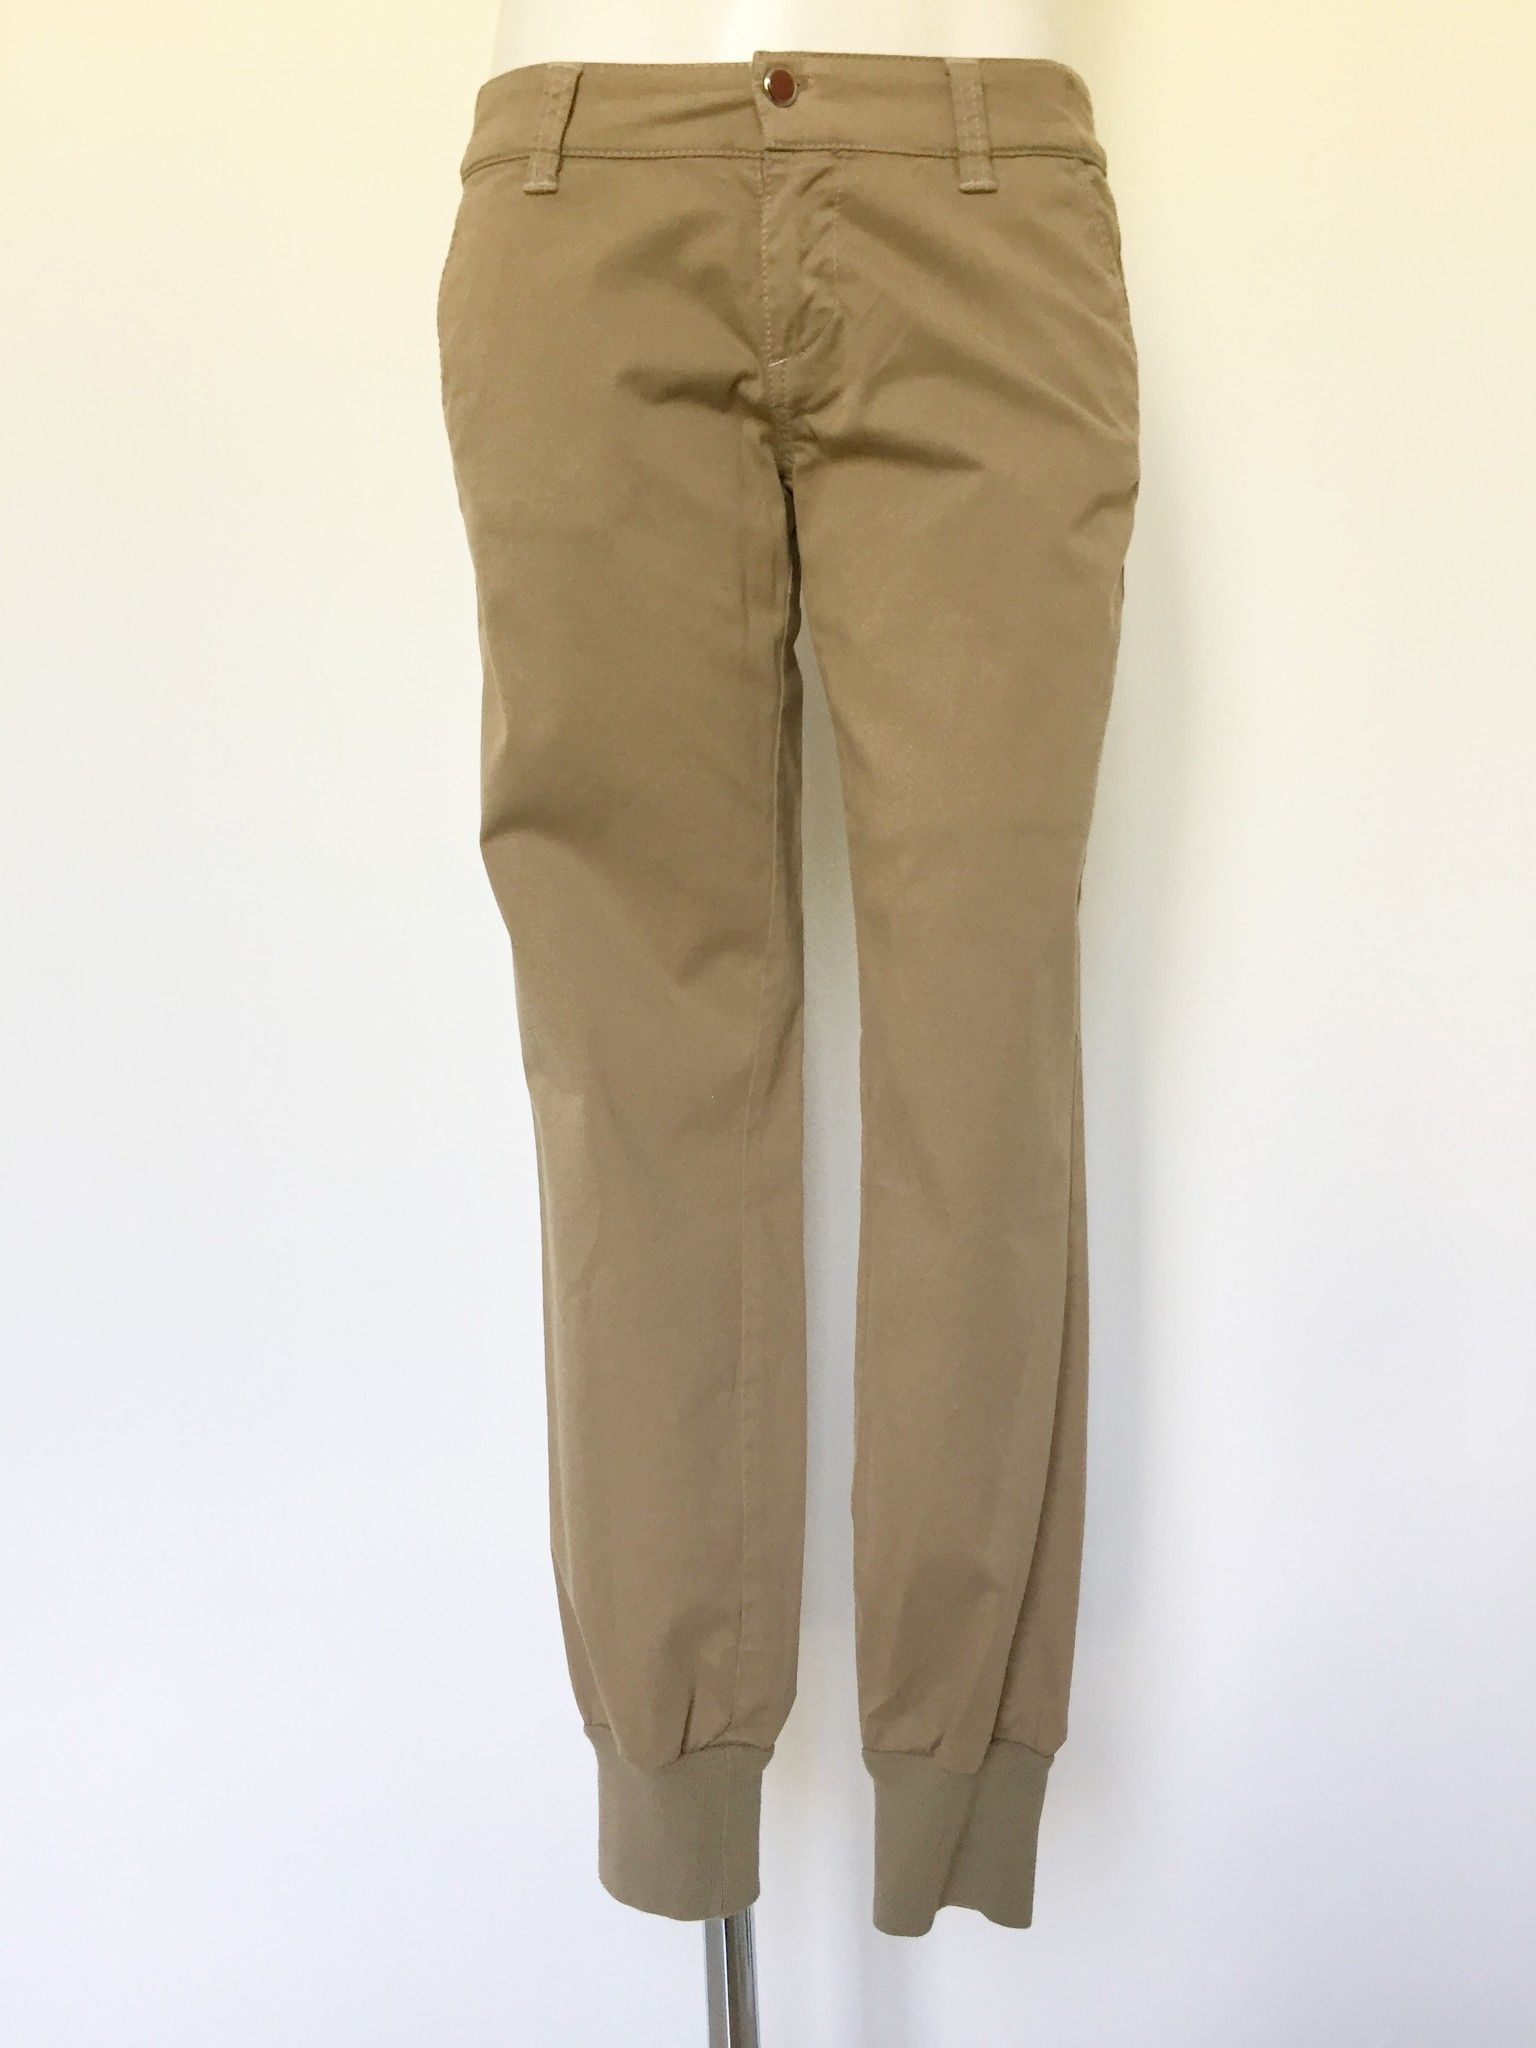 Qzee Sports Pants with Ankle Fabric Strap Cod.fly12